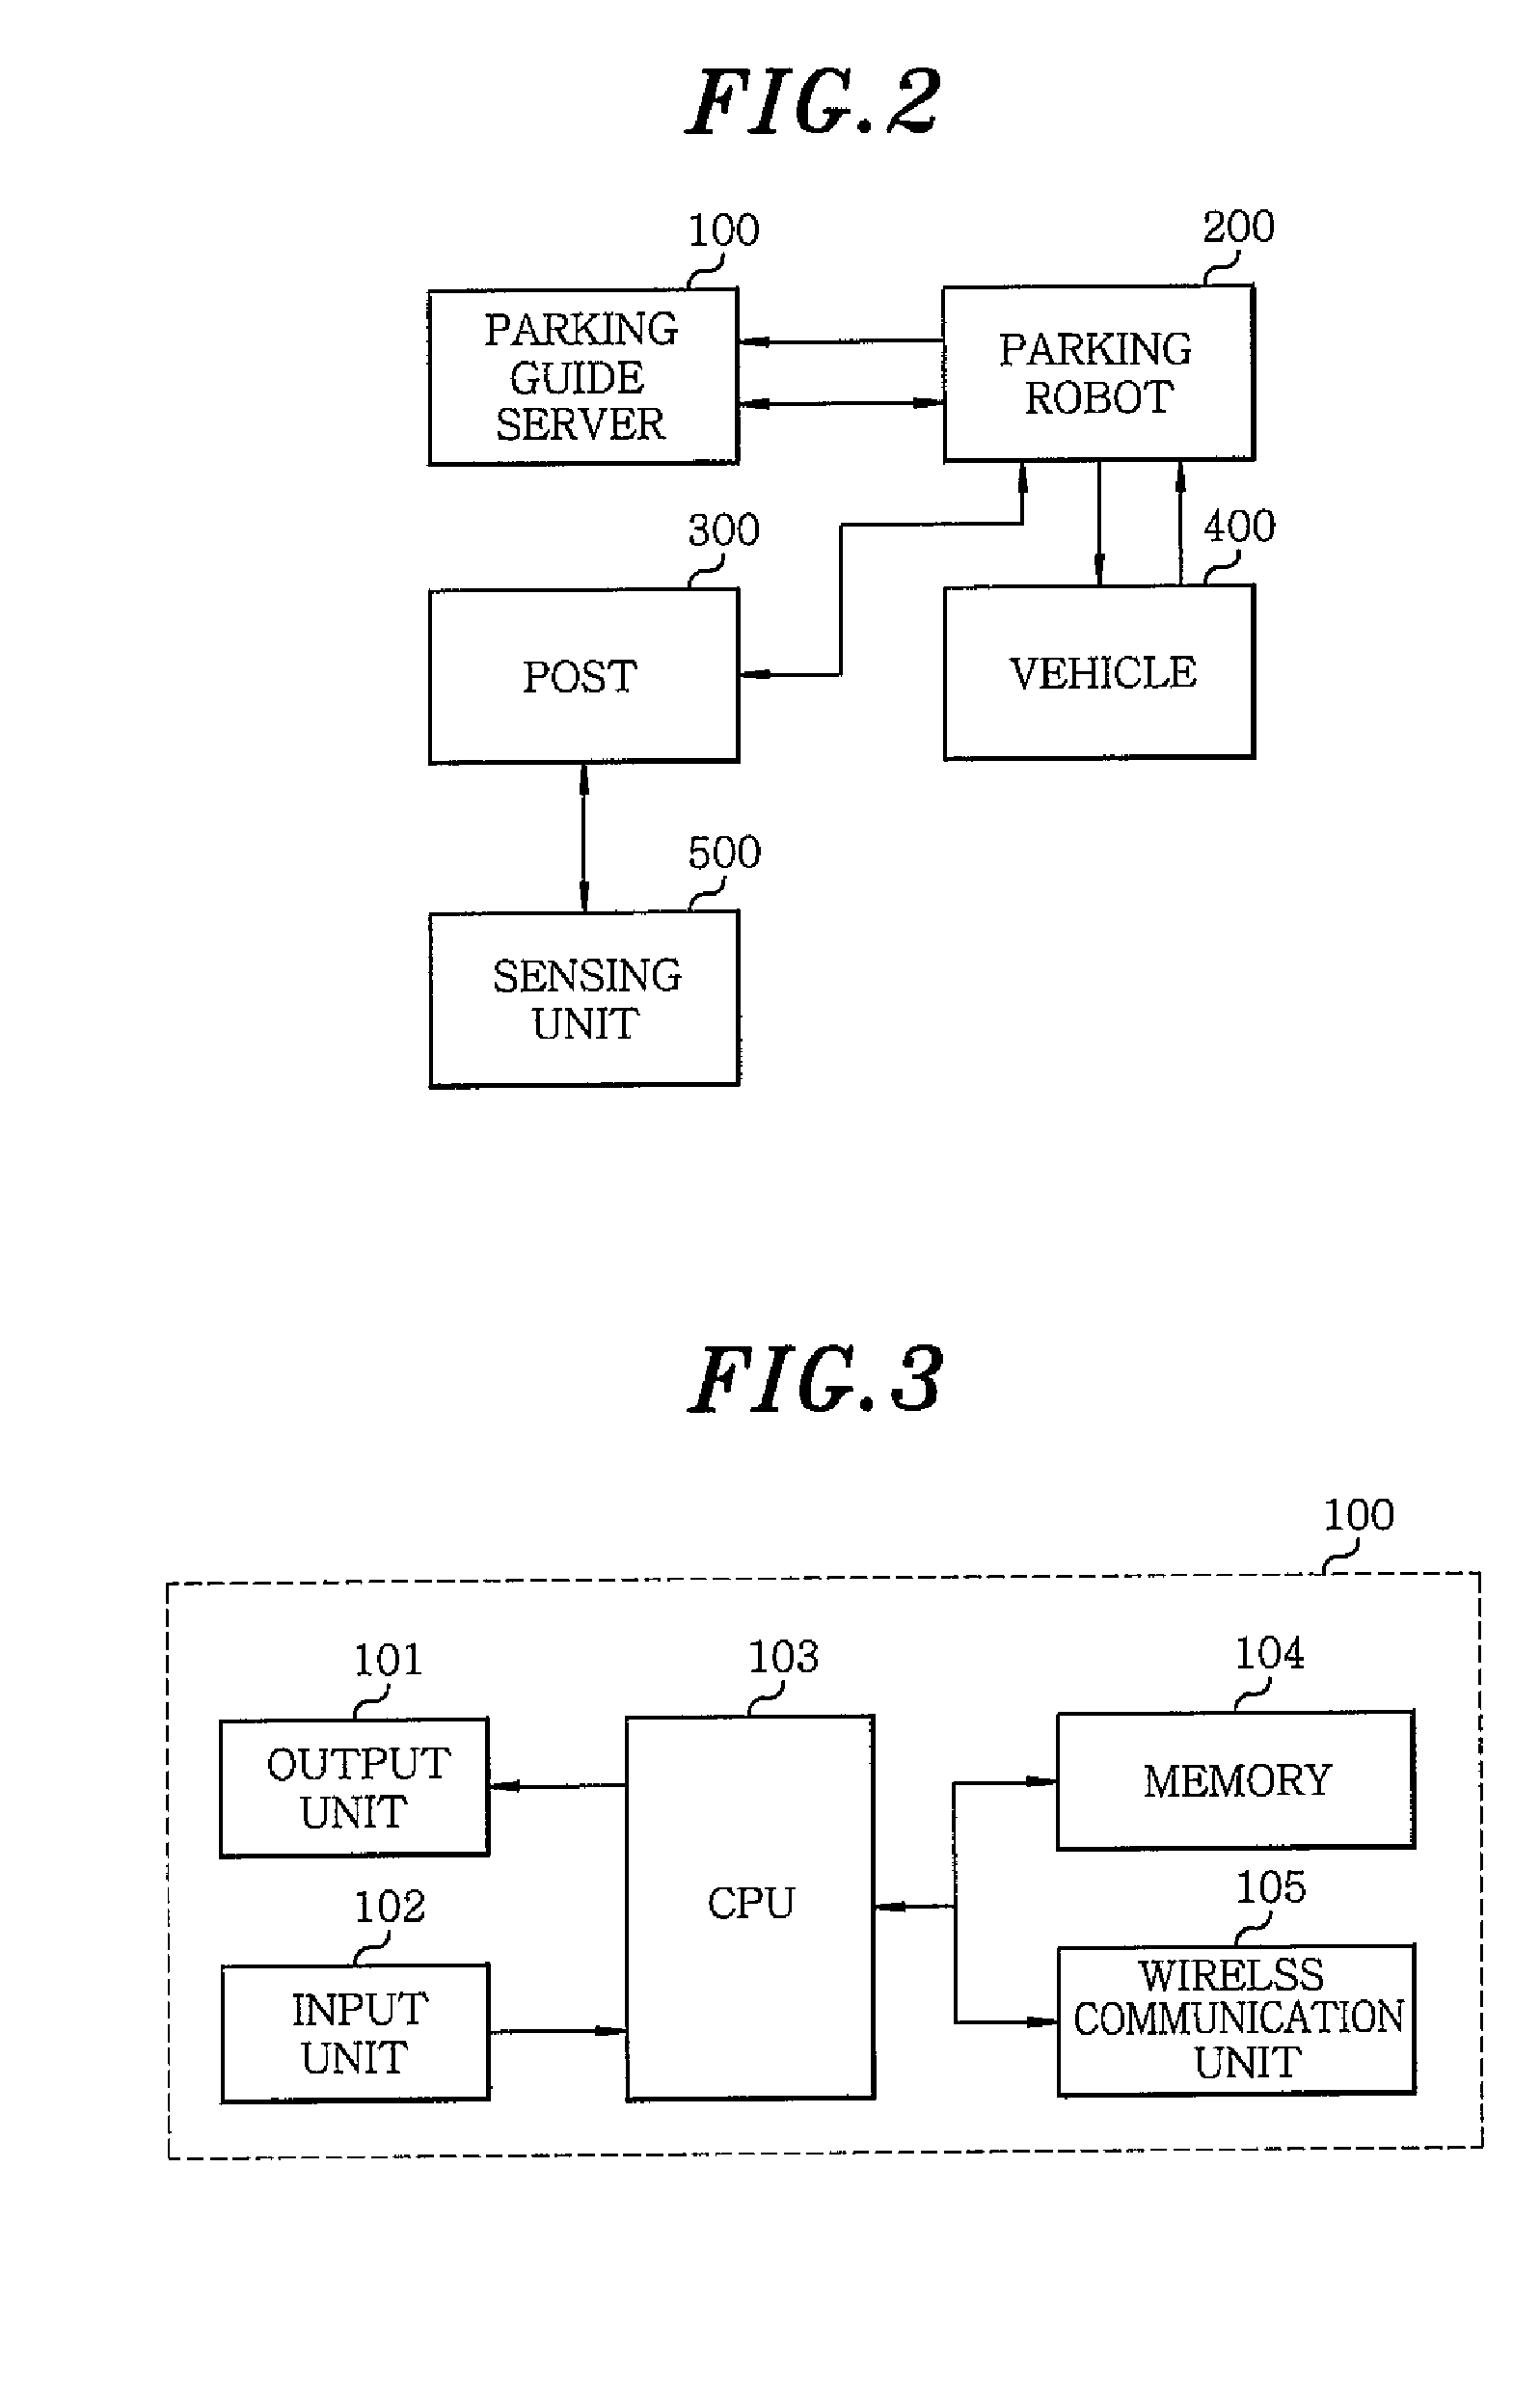 System and method for controlling automatic parking